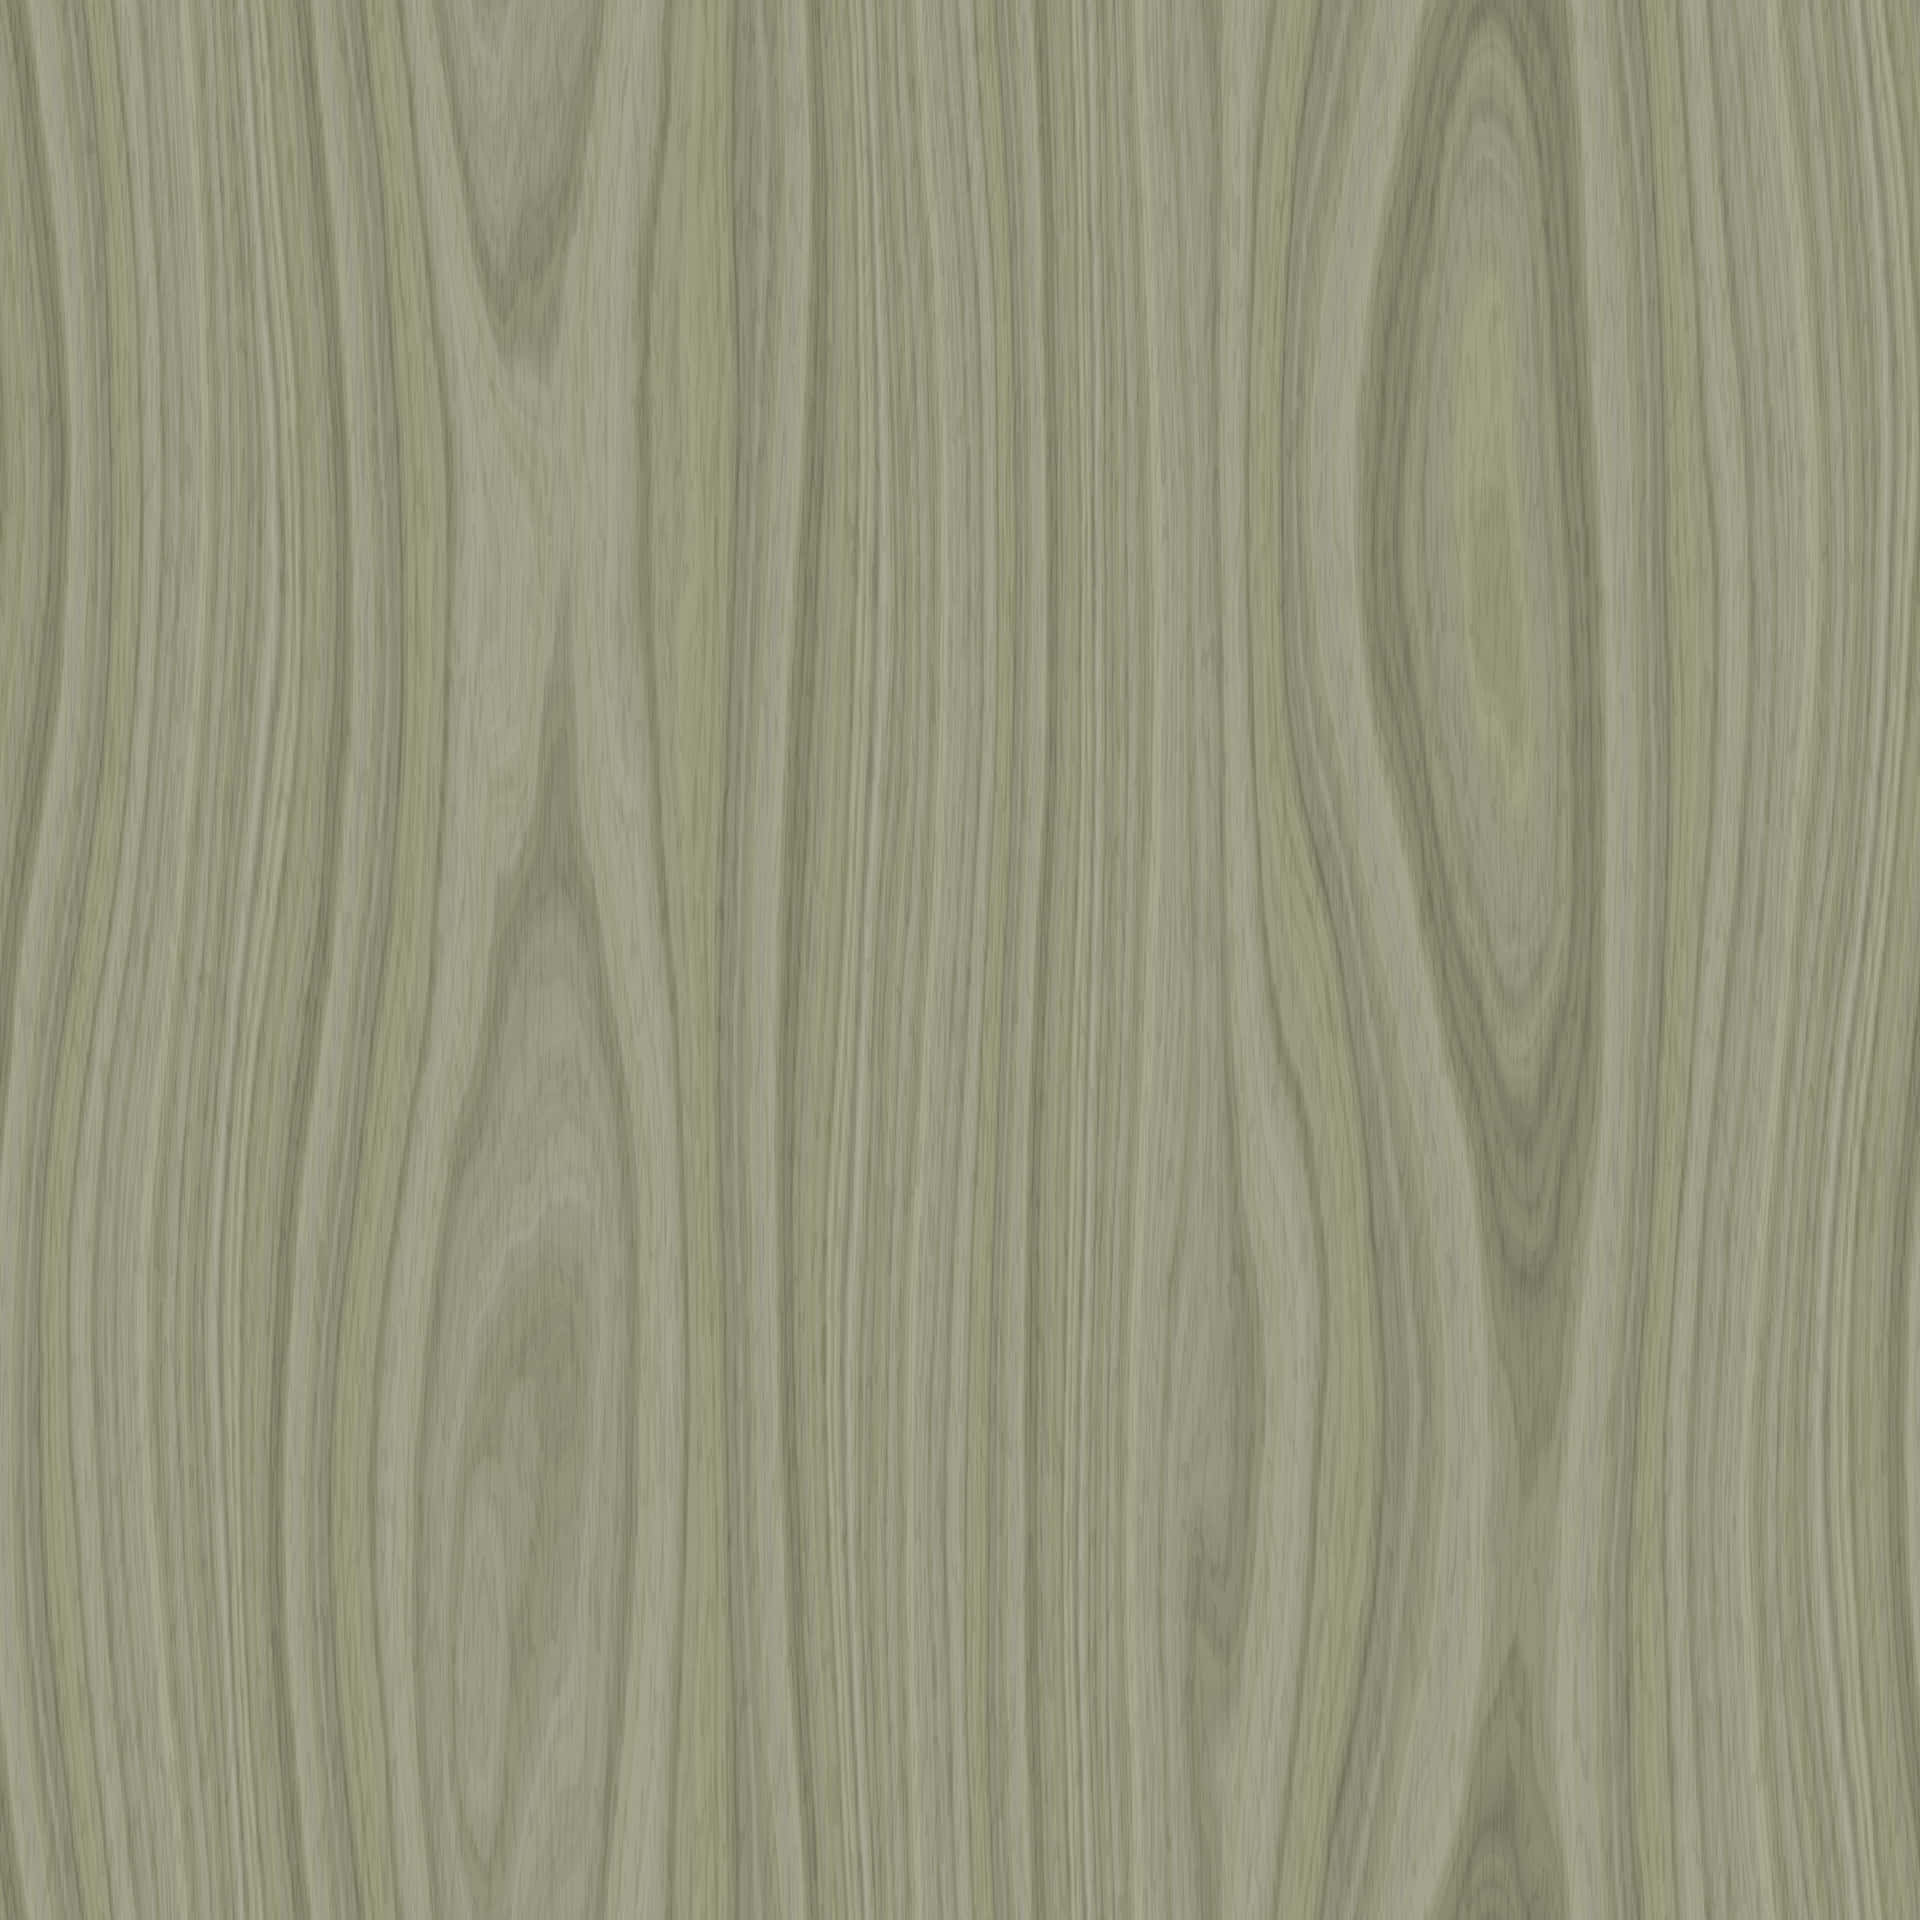 A weathered grey wood grain texture to create an interesting background